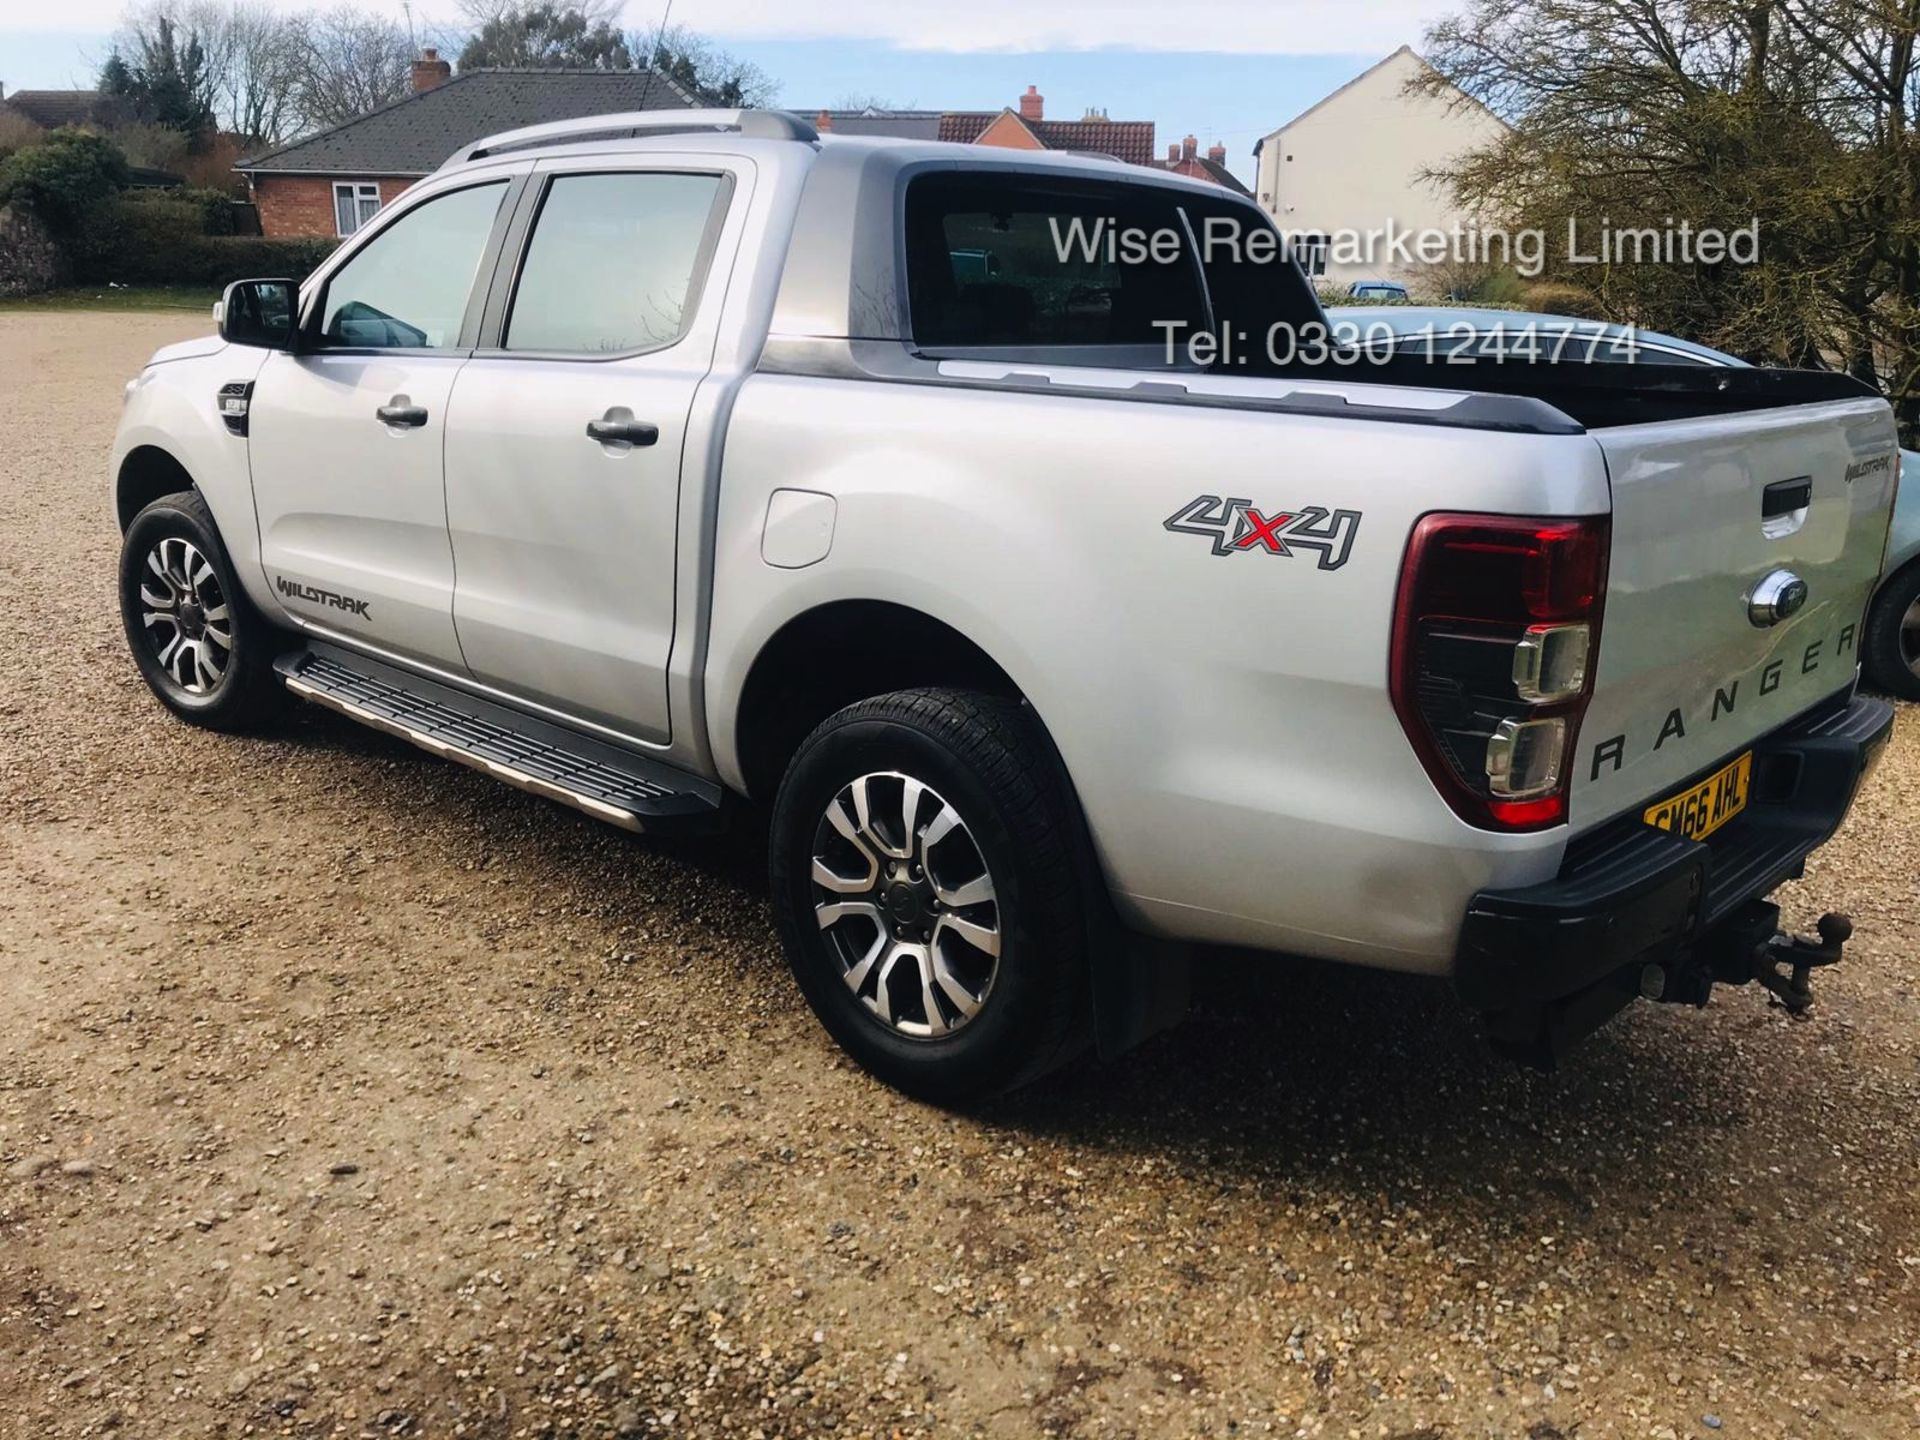 Ford Ranger 3.2 TDCI WILDTRAK - Auto - 2017 Model - 1 Former Keeper - 4x4 - TOP OF THE RANGE - Image 3 of 16